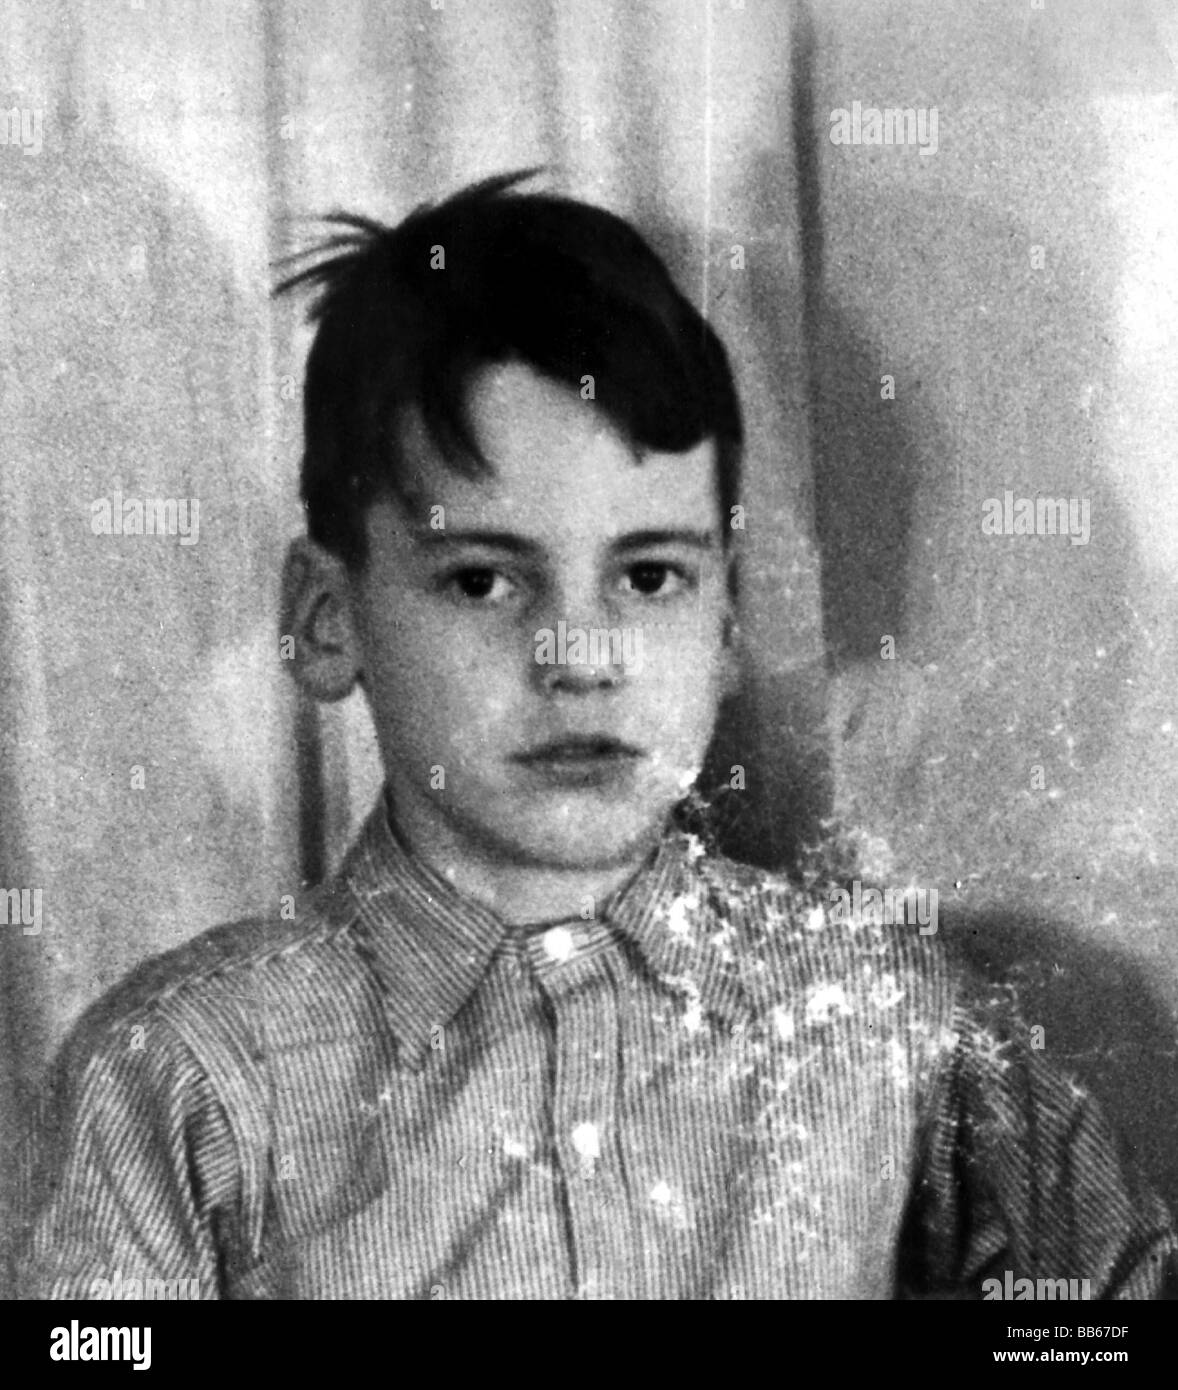 Schell, Maximilian, 8.12.1930 - 1.2.2014, Austrian actor and director, as child, portrait, late 1930s, , Stock Photo